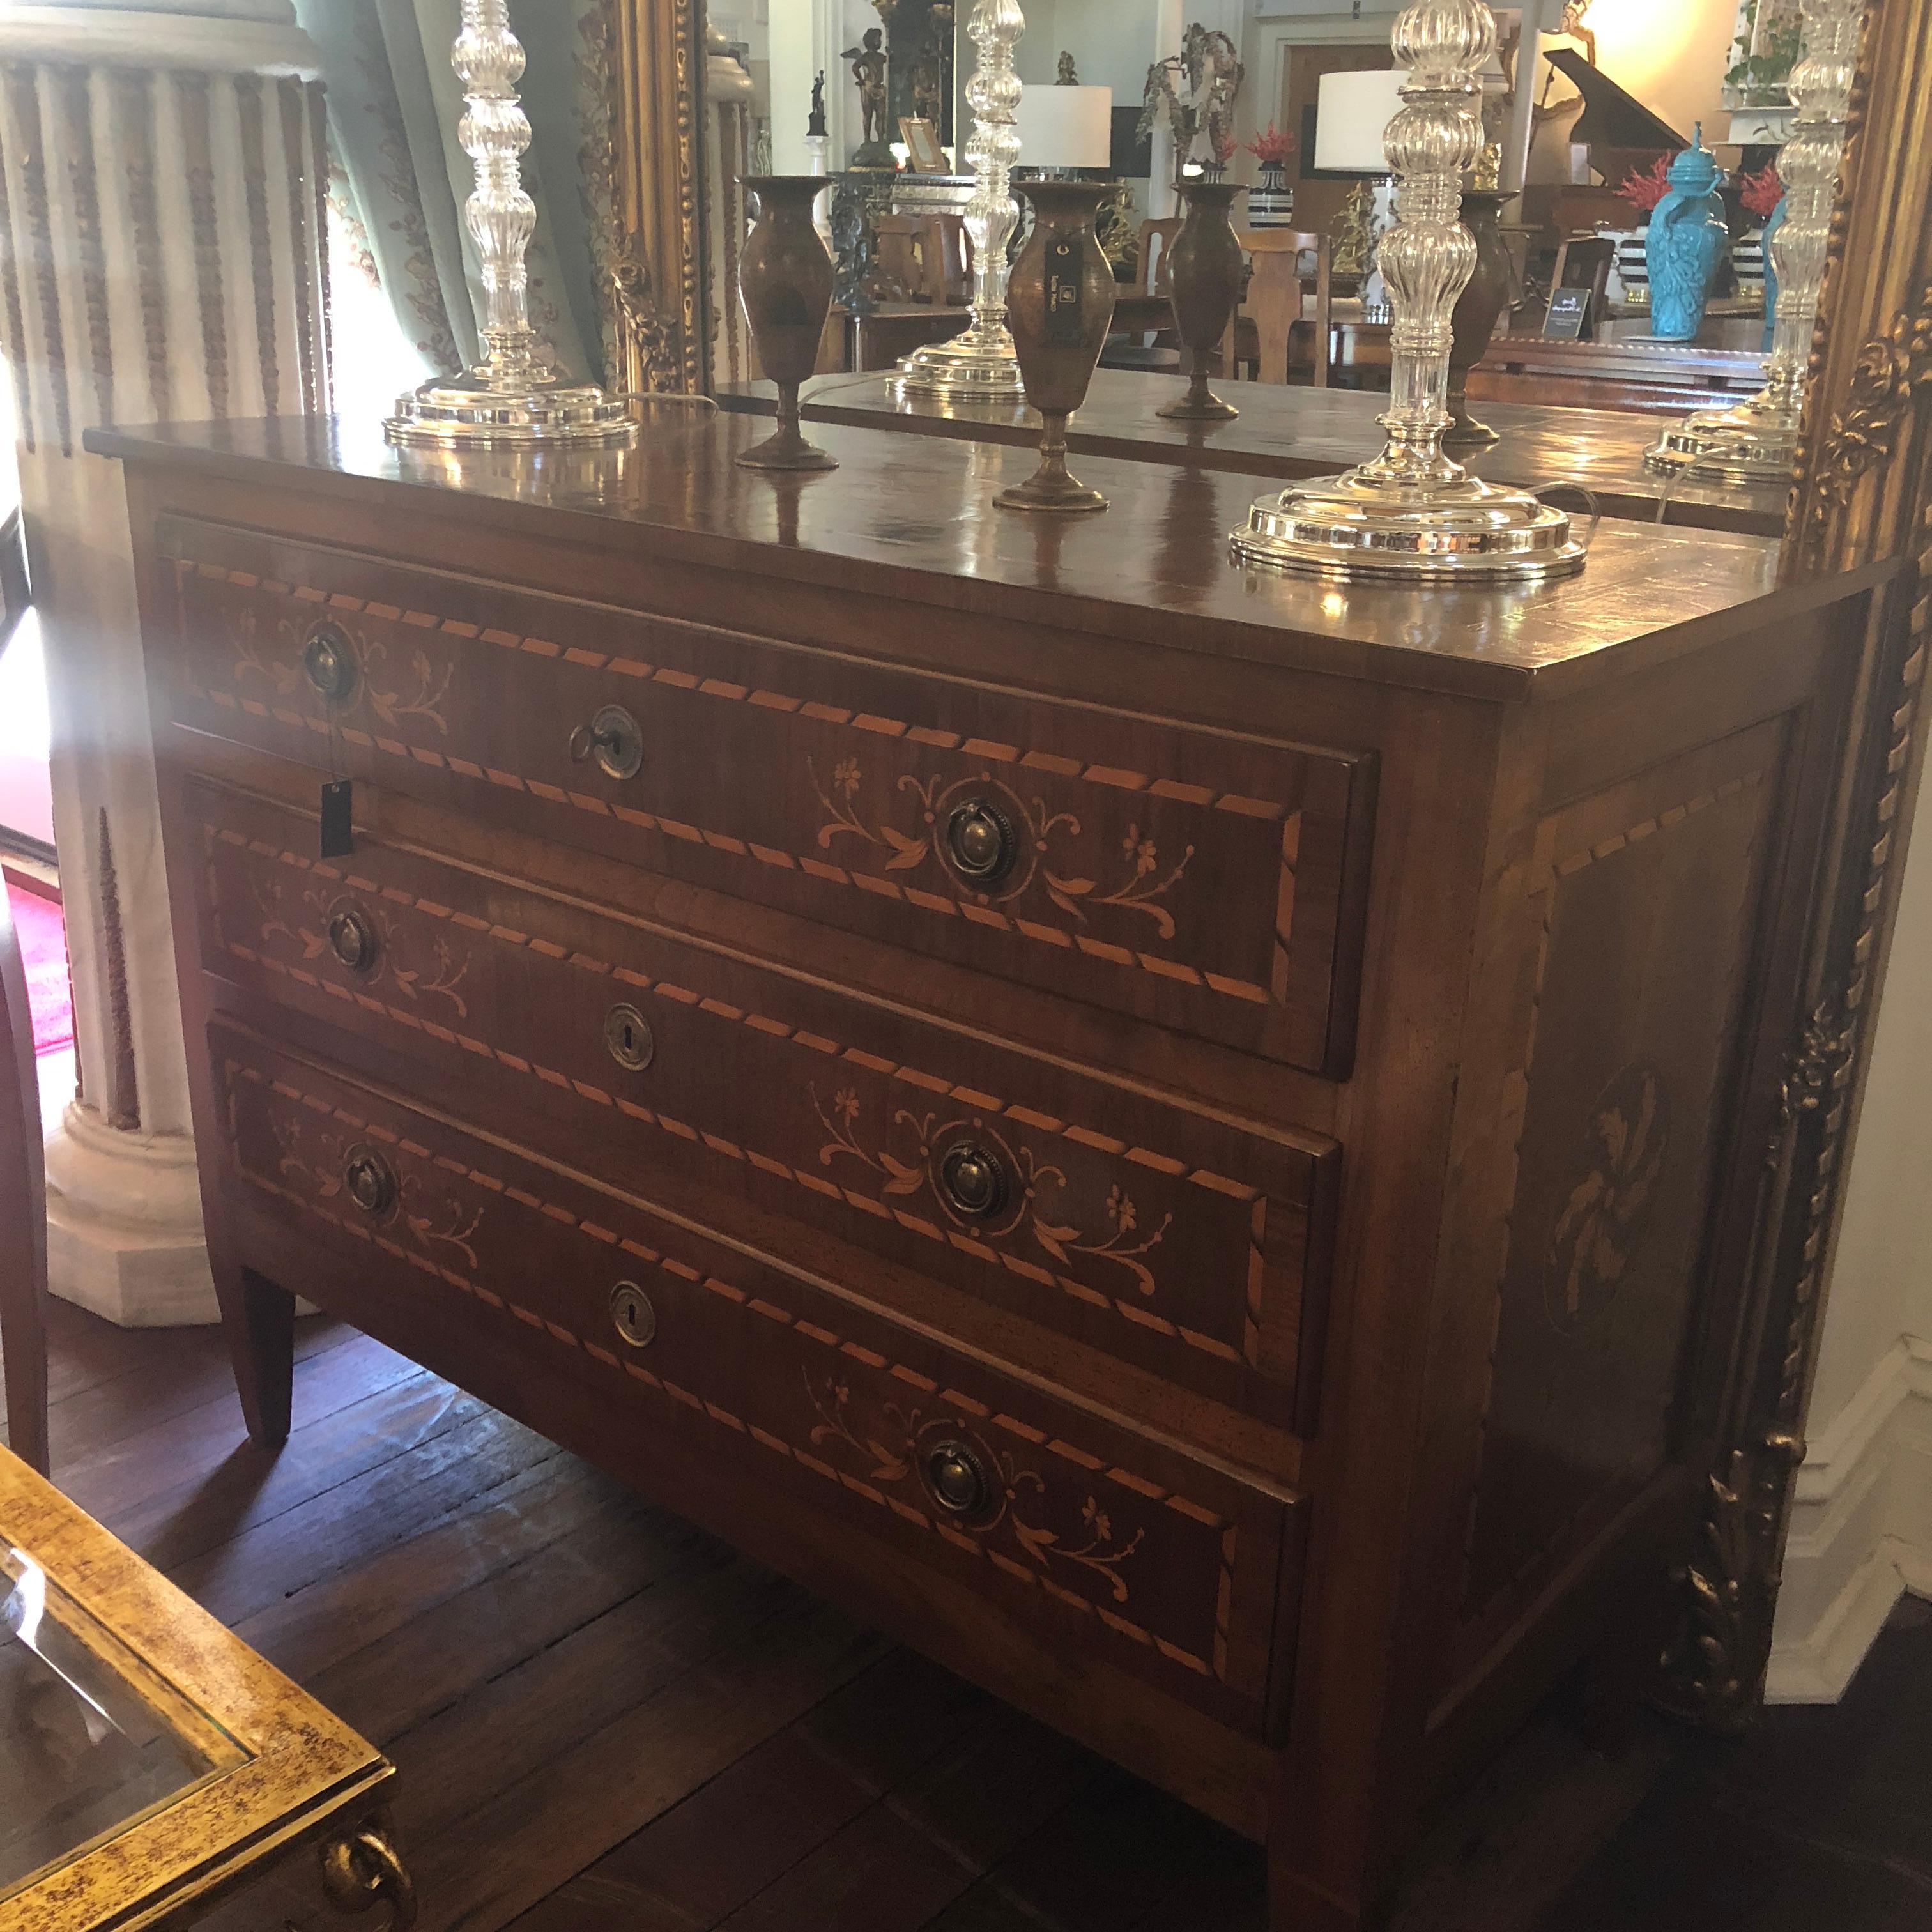 This rare and utterly perfect Italian walnut commode, has been dated in Italy to circa 1700. Featuring the classical Louis XVI form, this commode has been restored to museum quality. On the front, fiore and binding inlay adorns each drawer. In the